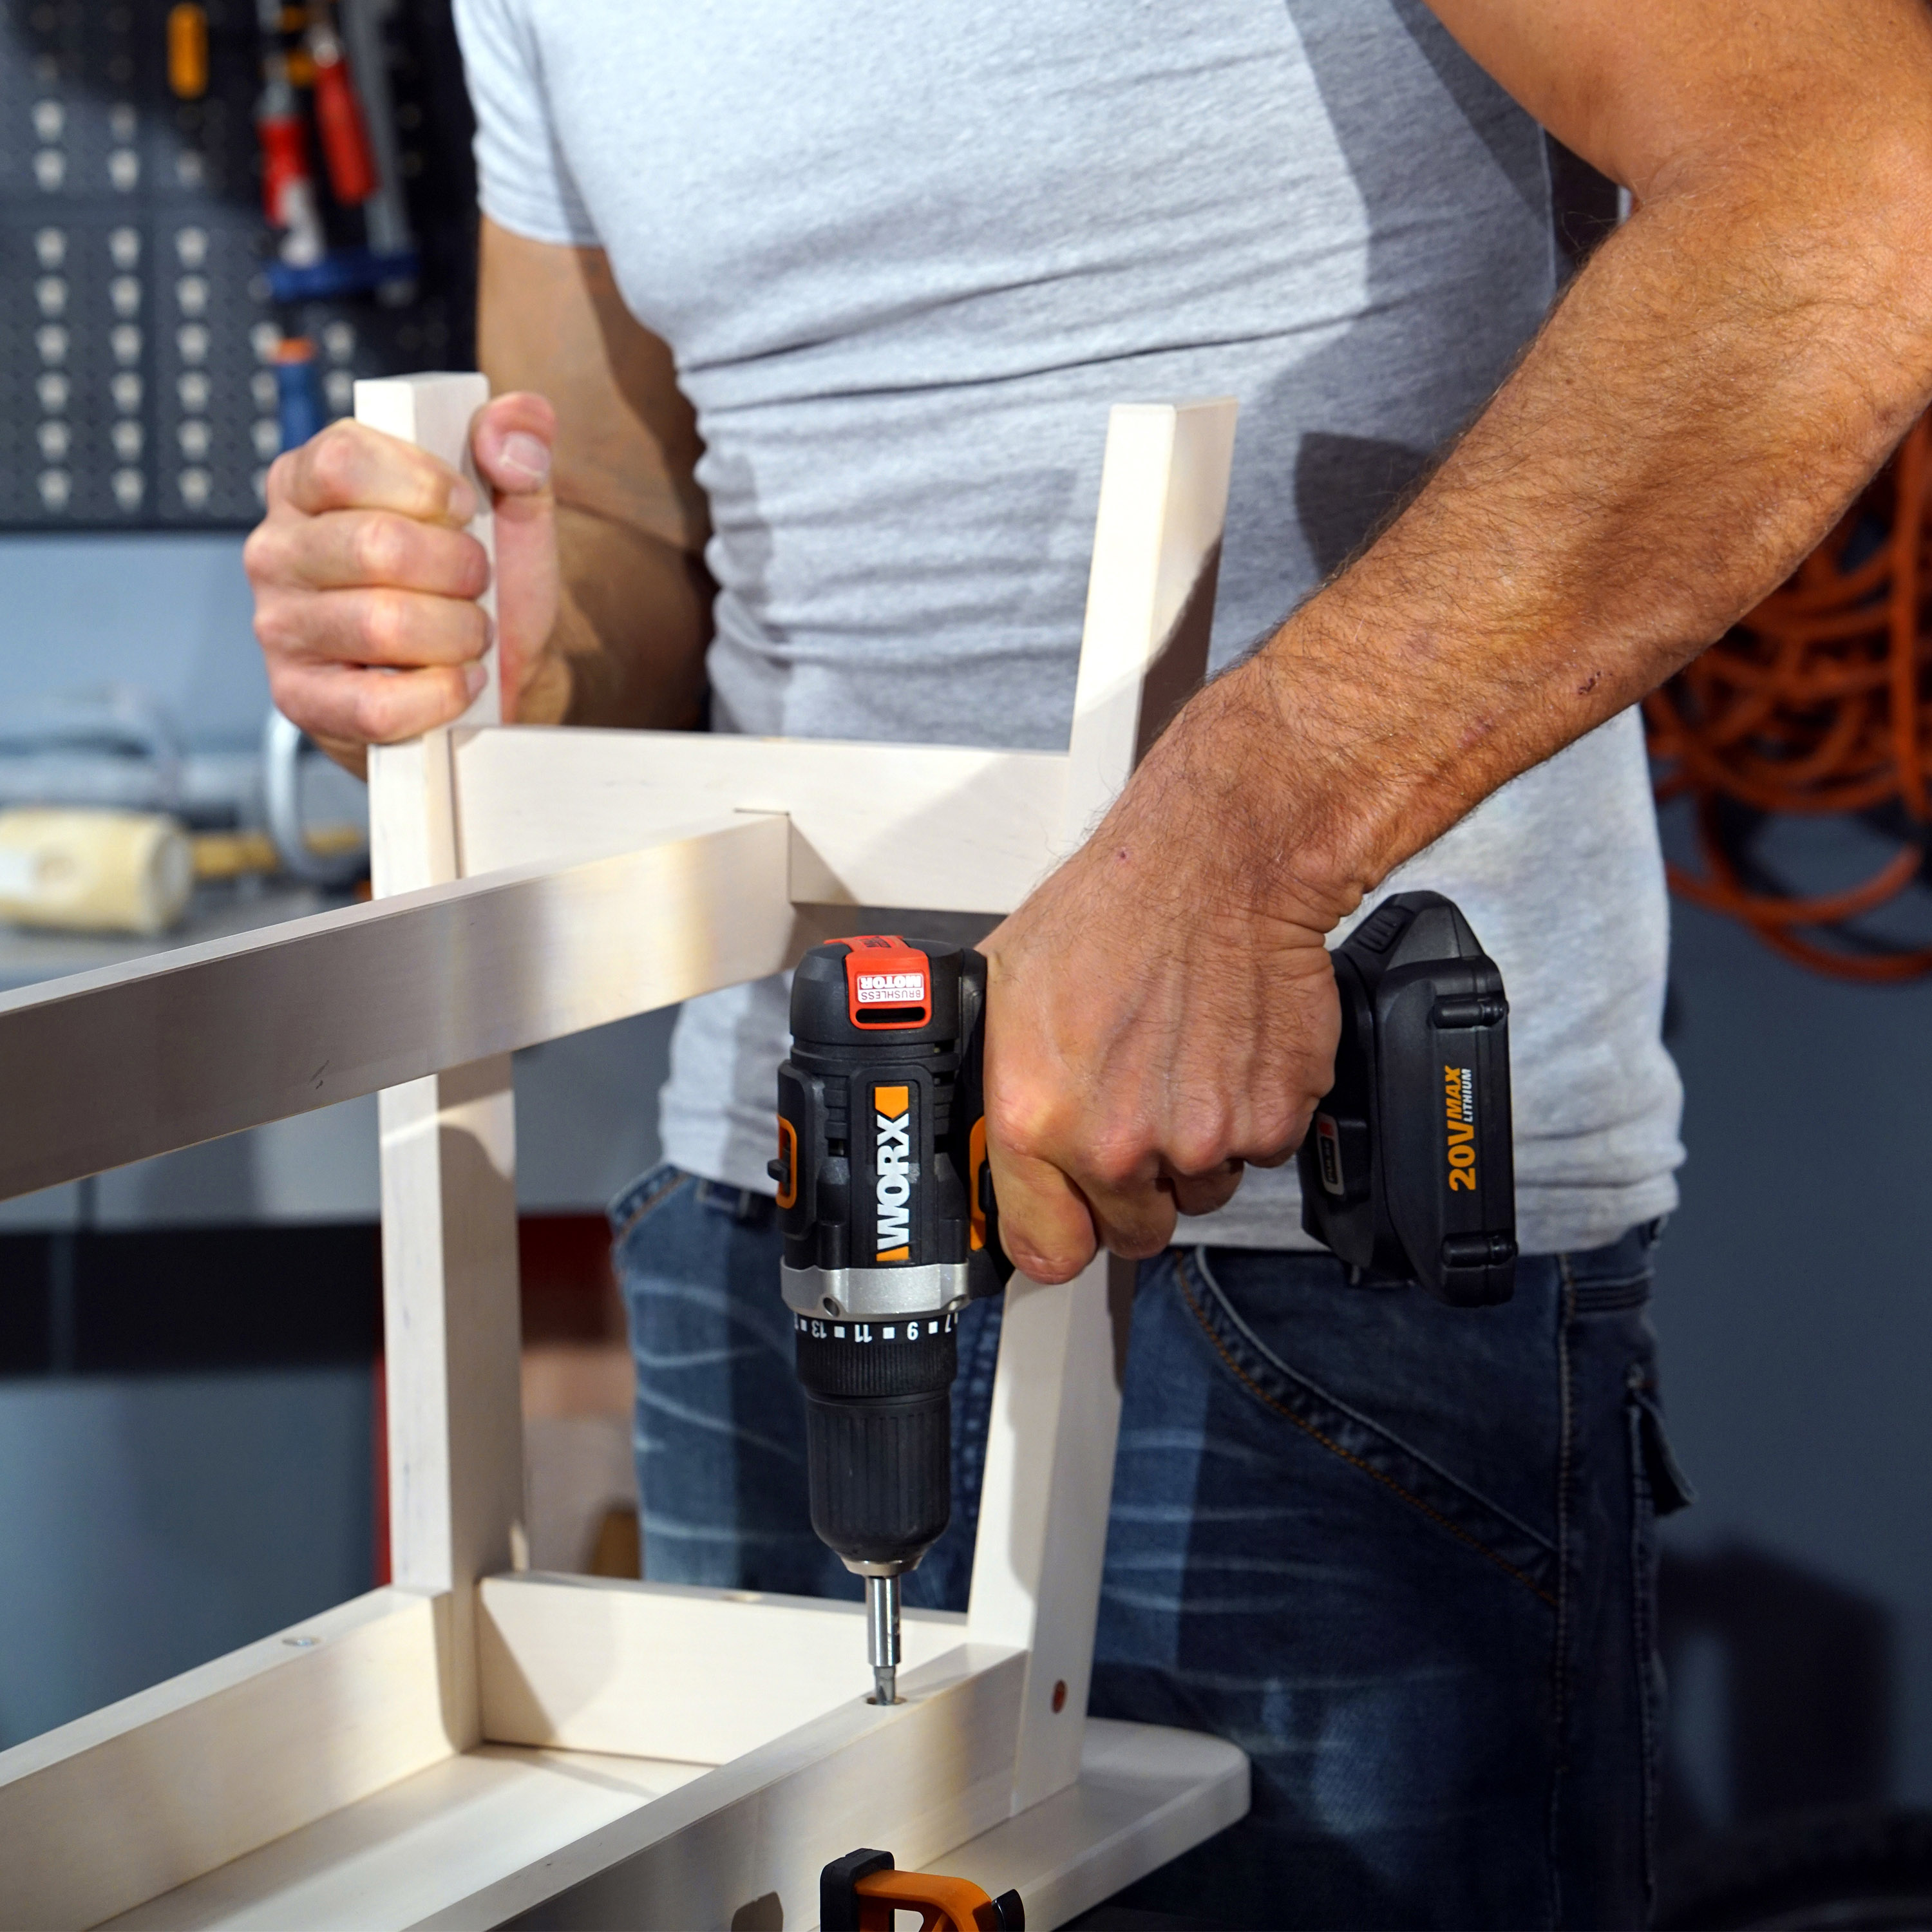 WORX 20V Brushless Drill & Driver is handy for completing everyday tasks, such as assembling or repairing furniture.